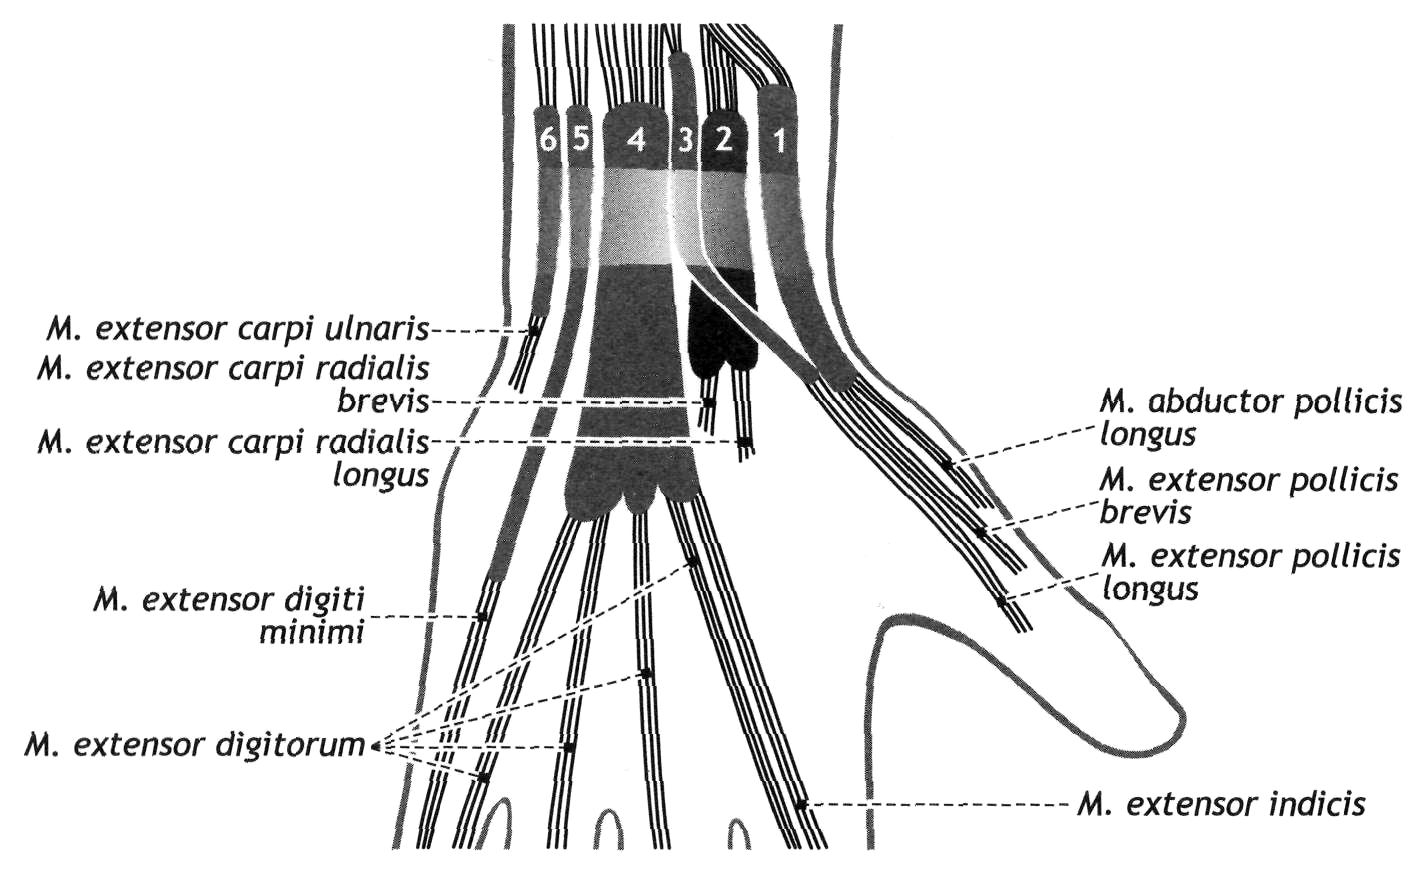 A diagram of the muscles of the hand

Description automatically generated with low confidence